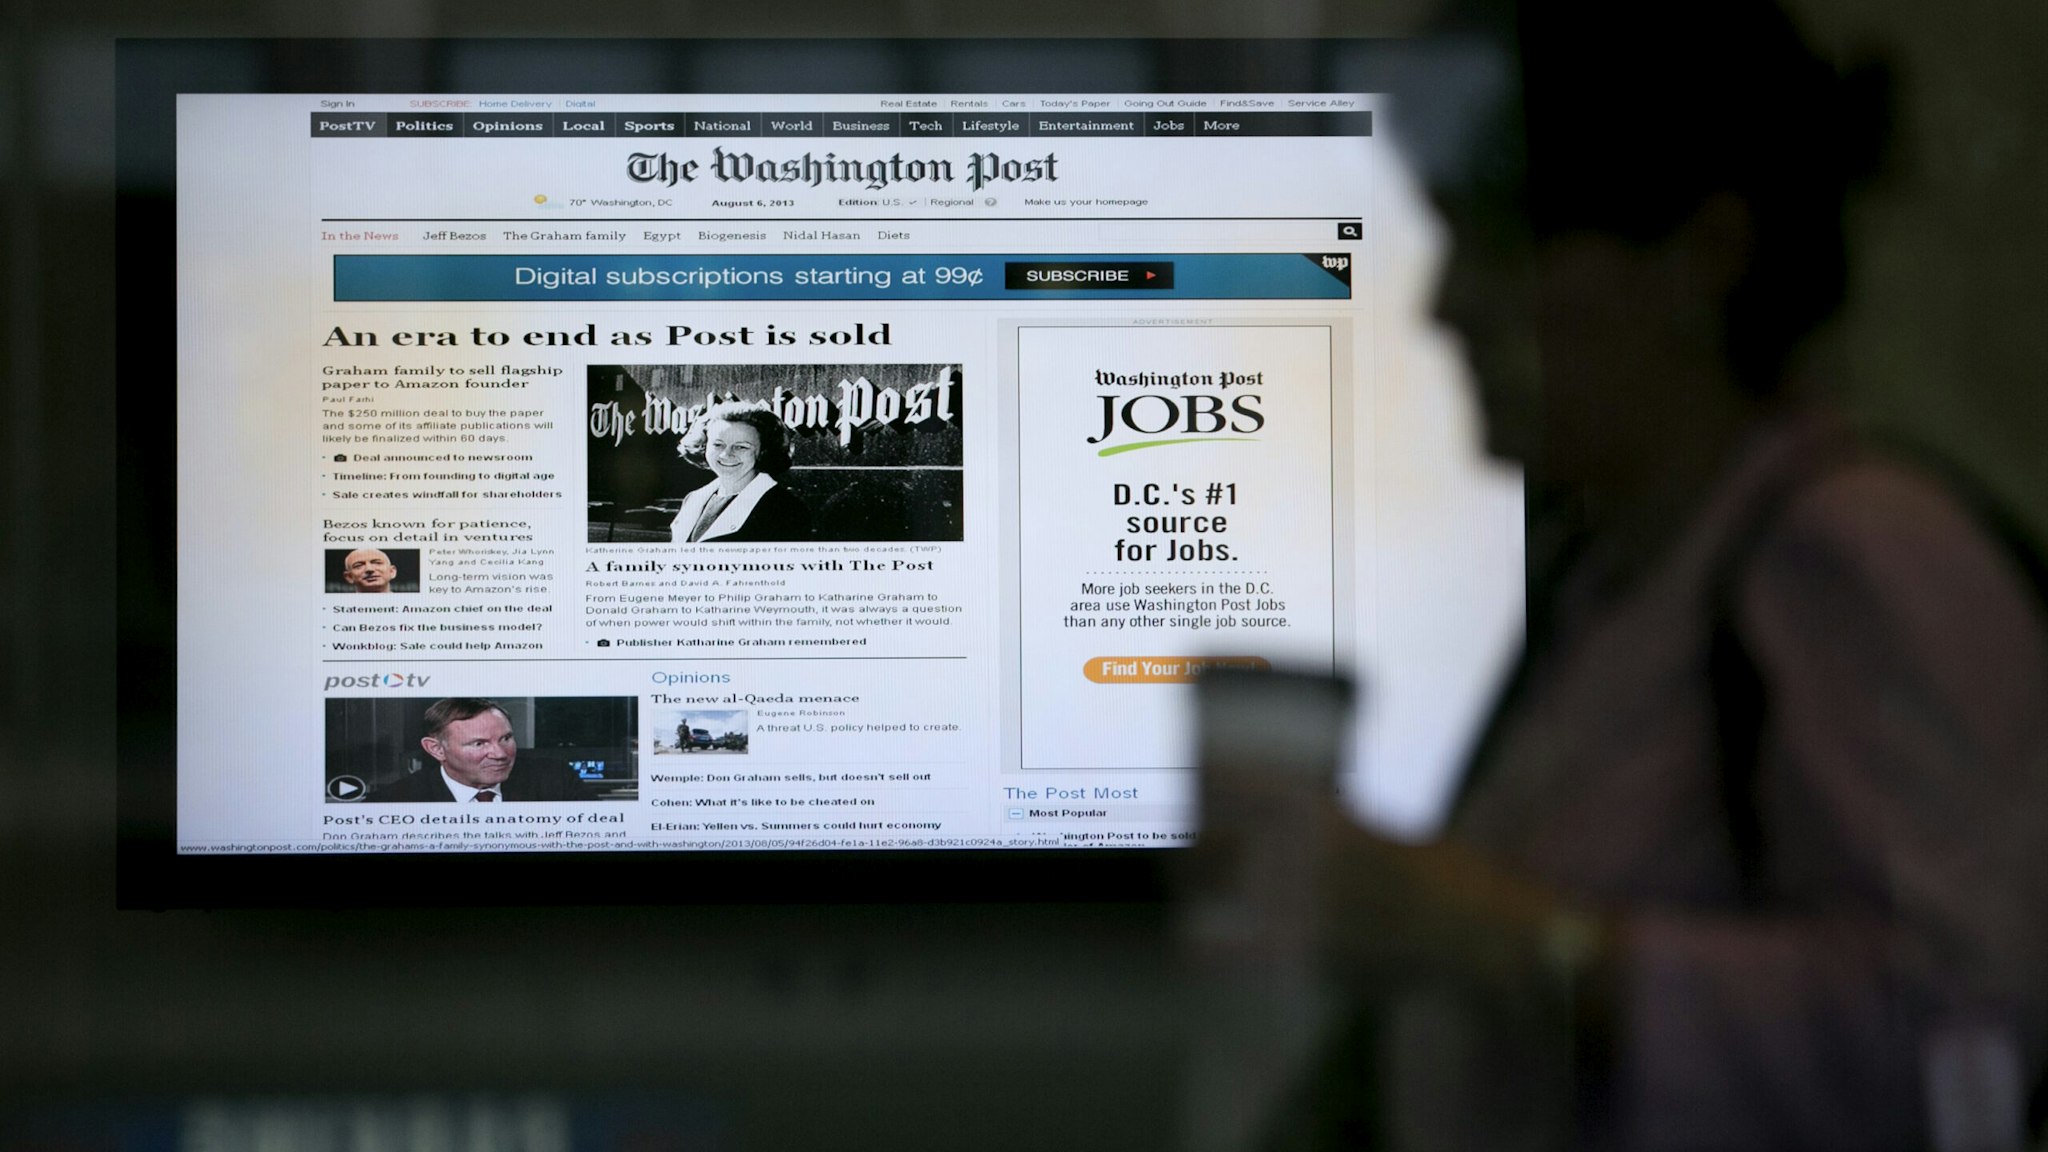 A woman walks past a monitor displaying news that the owners of the Washington Post are to sell the newspaper to billionaire Jeff Bezos inside the Washington Post Co. headquarters in Washington, D.C., U.S., on Tuesday, Aug. 6, 2013. Amazon.com Inc. Chief Executive Officer Jeff Bezos agreed to buy the Washington Post for $250 million, betting that he can apply his success in e-commerce to the struggling newspaper industry.